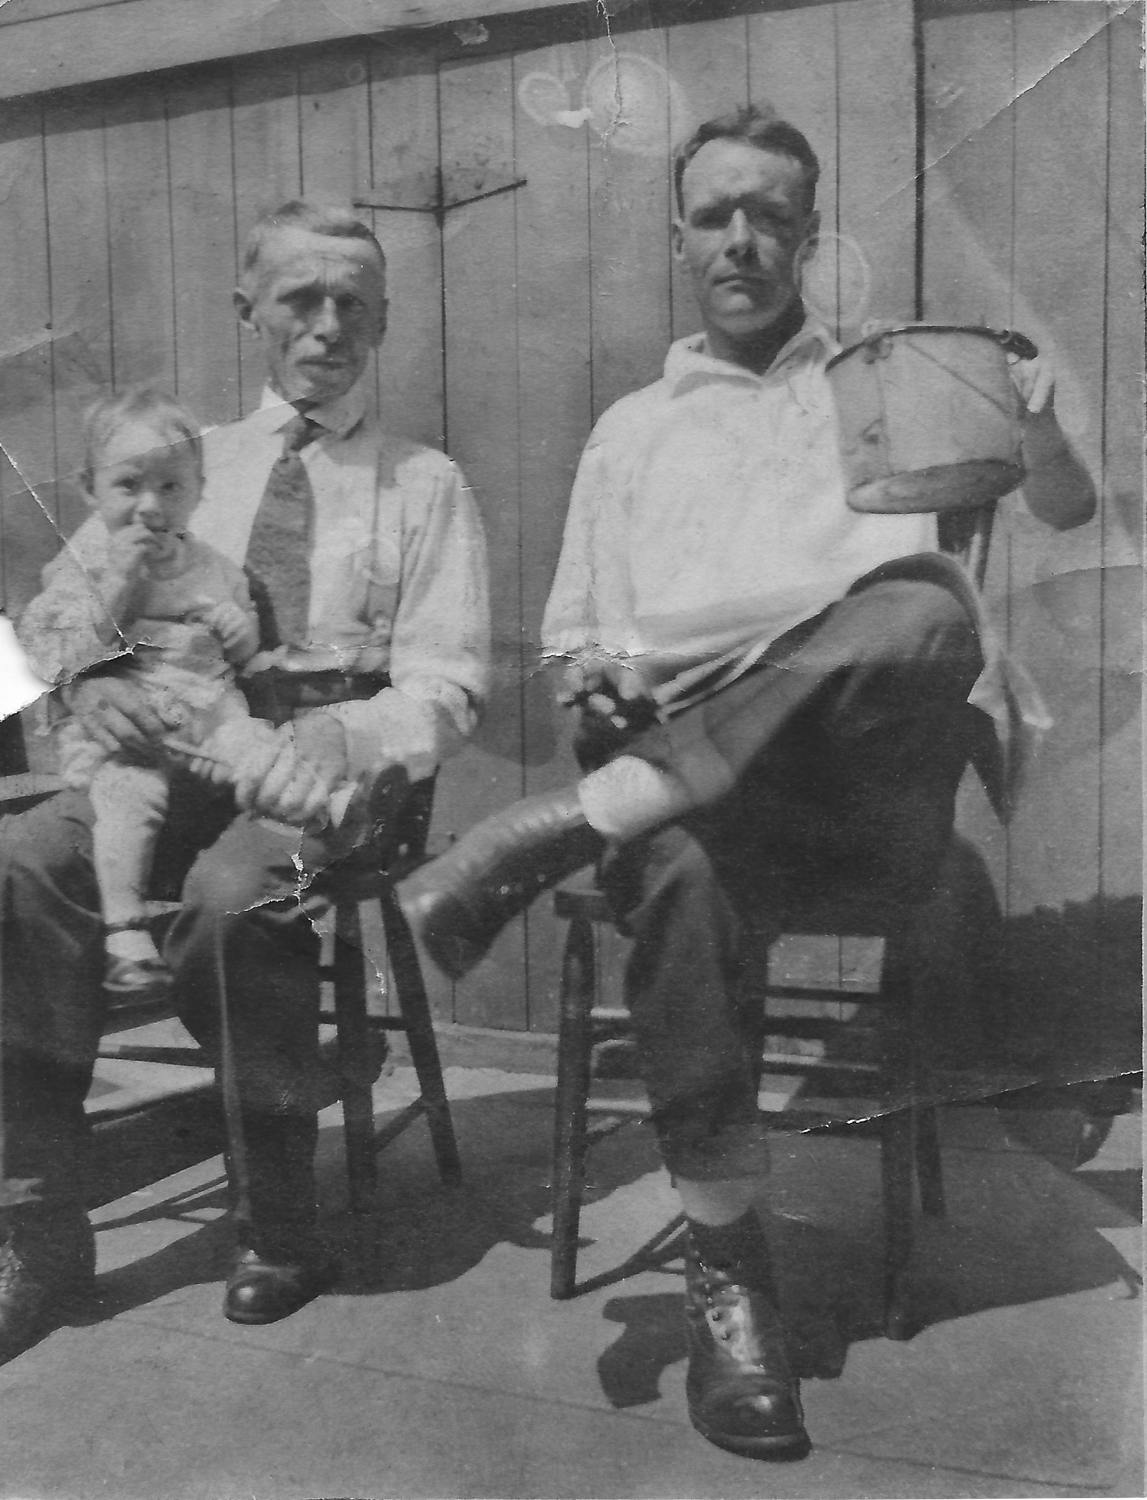 Herb, Grandpa Mossman, and Mike Mossman, holding a “beer can”